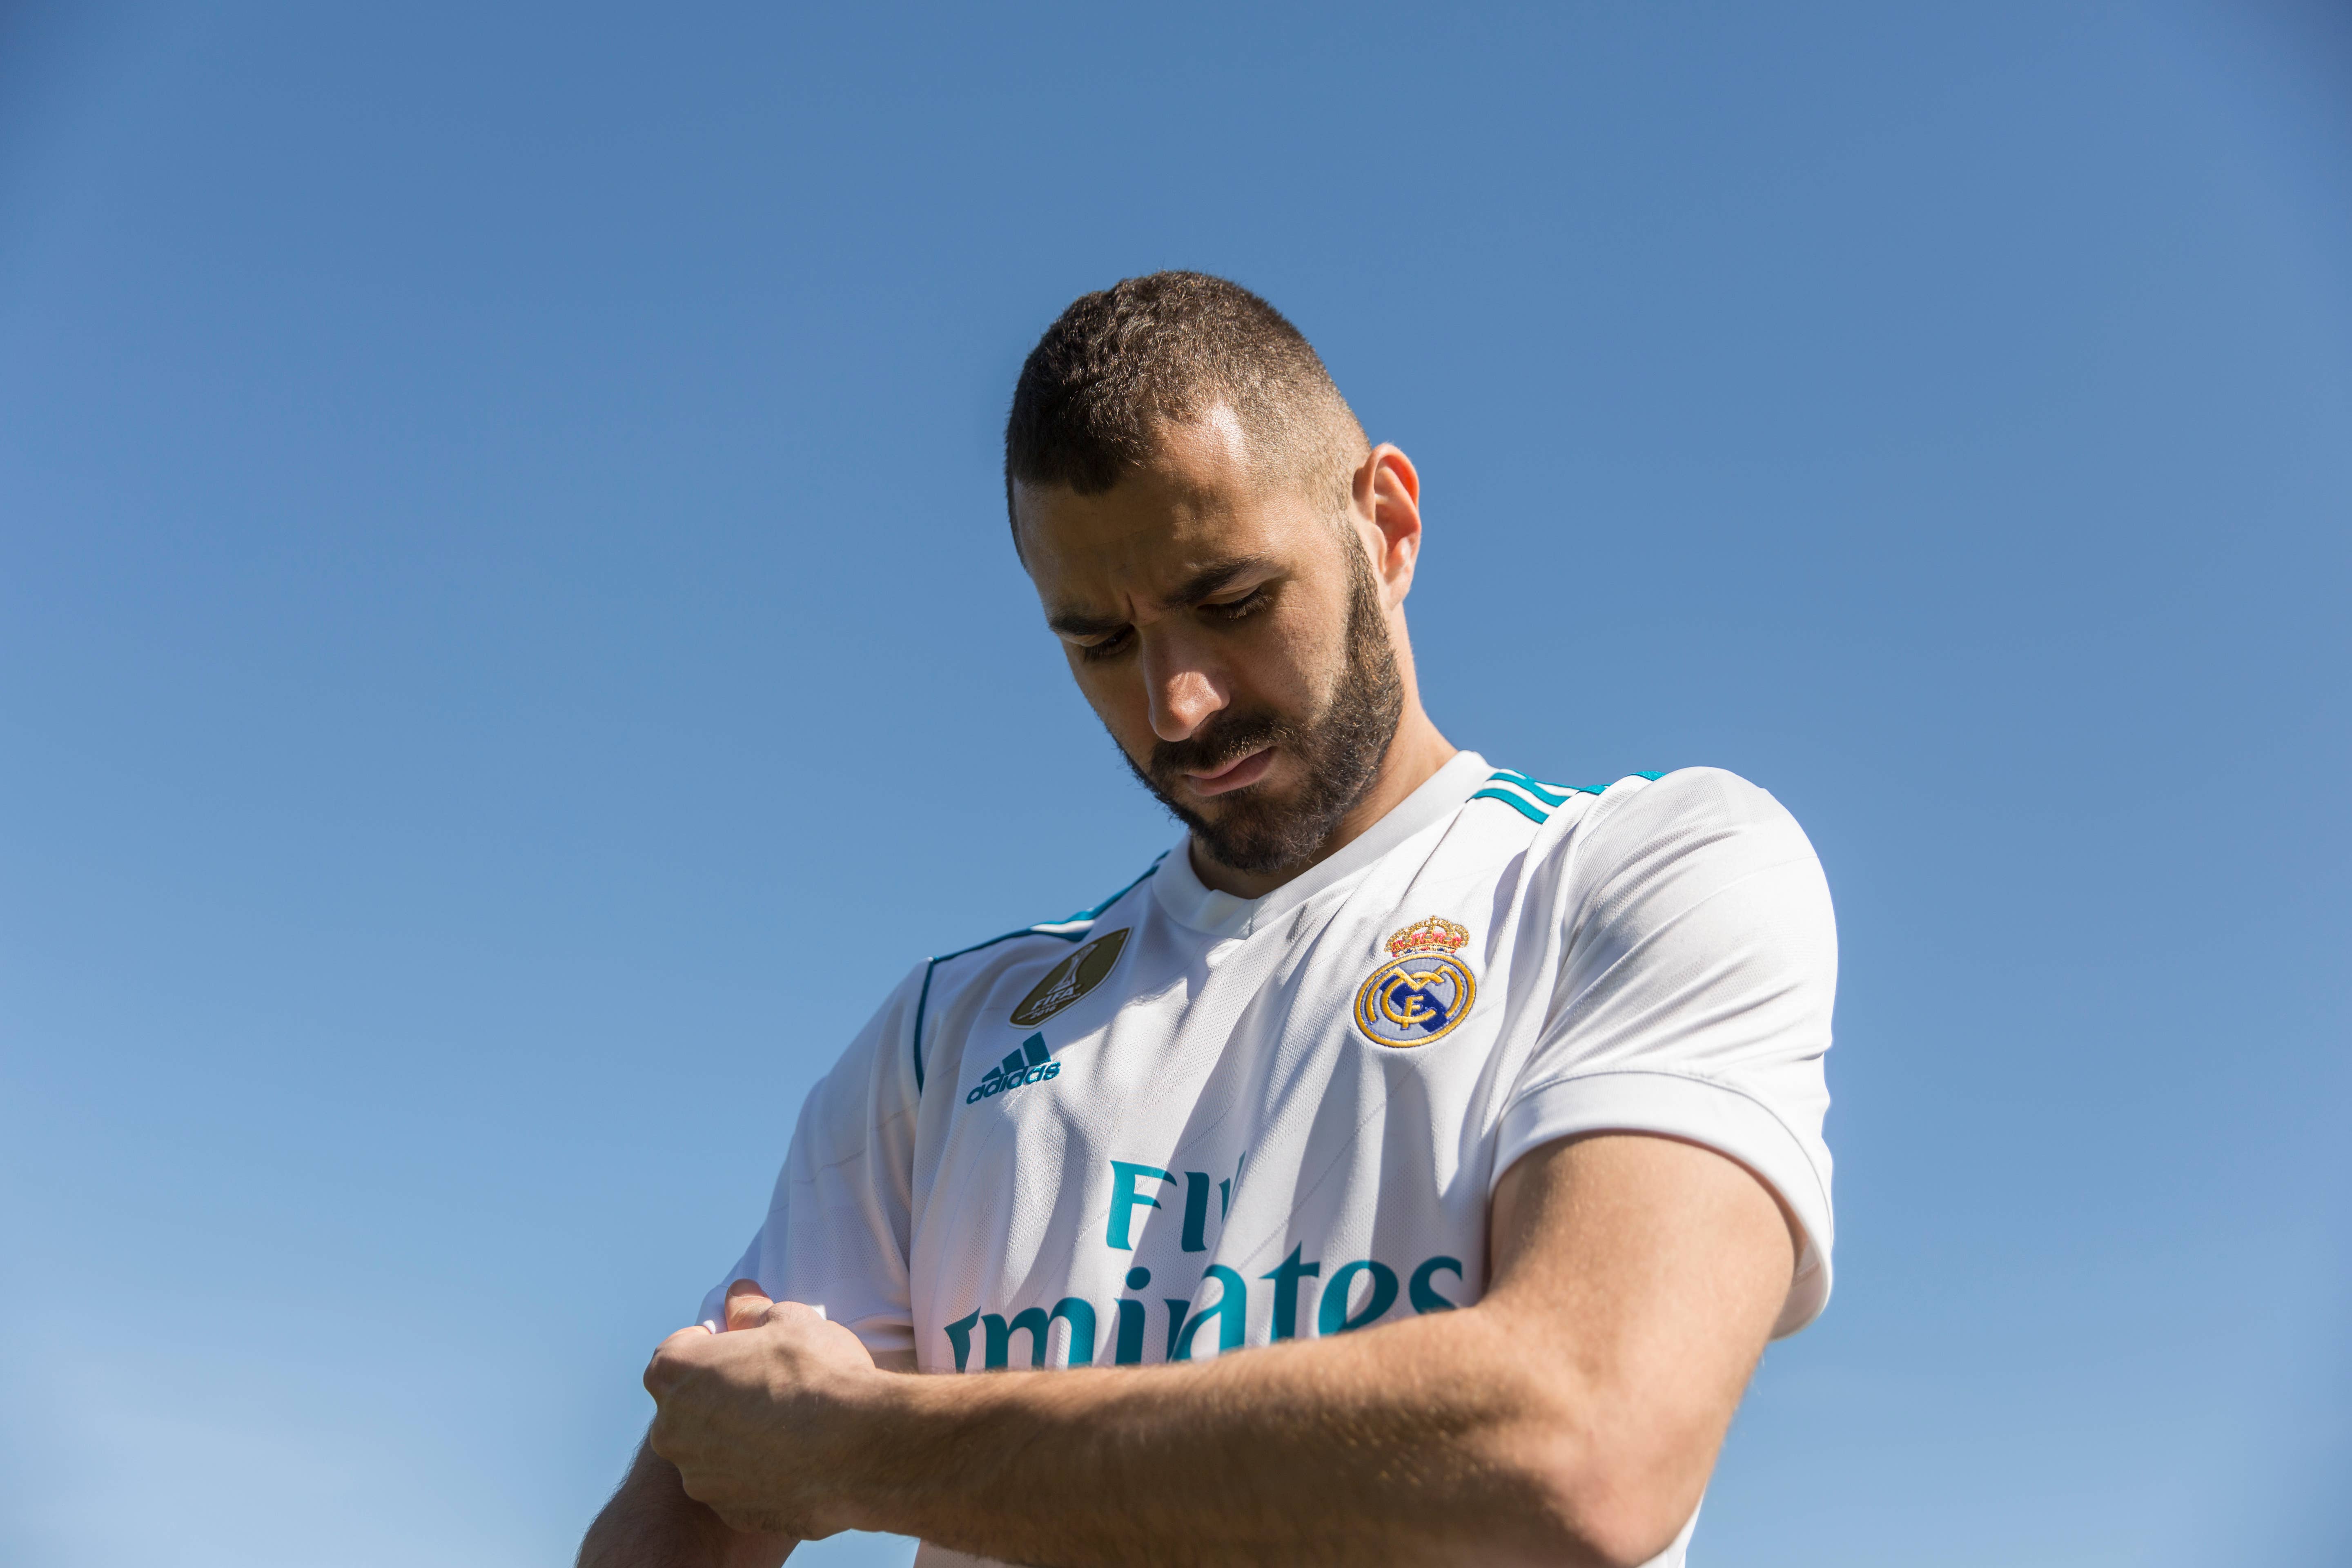 ADIDAS REAL MADRID 2017 HOME JERSEY